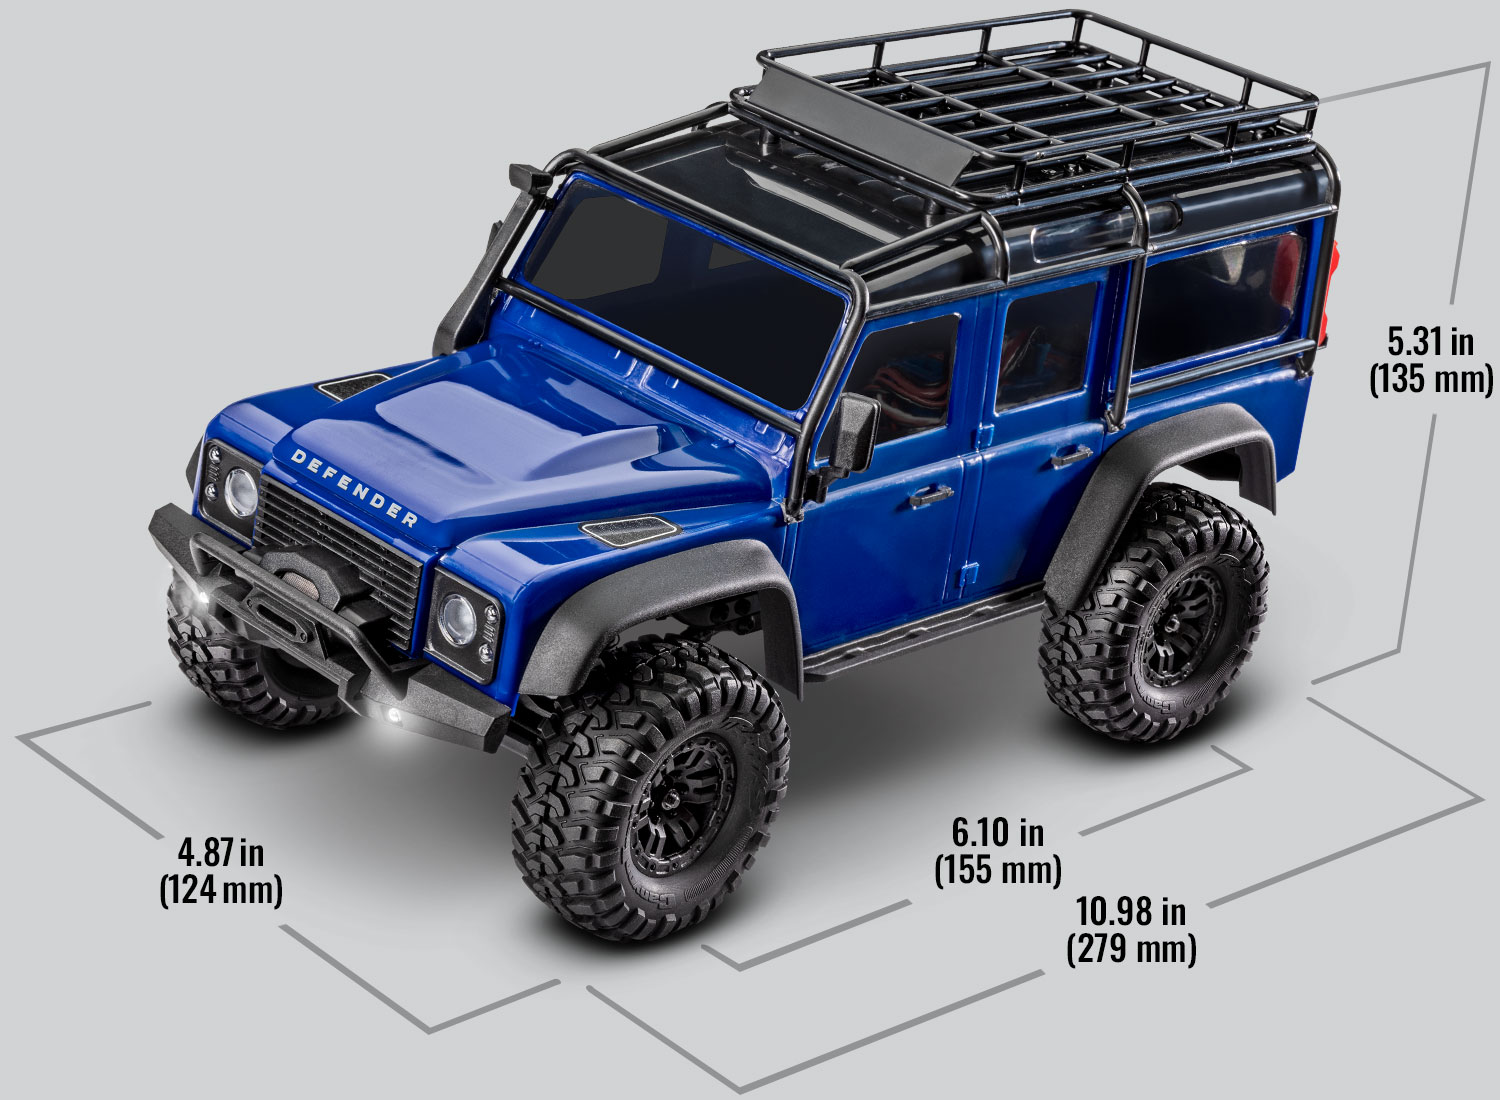 TRAXXAS TRX-4M Land Rover Defender / Ford Bronco 1/18 4WD RTR Scale Crawler